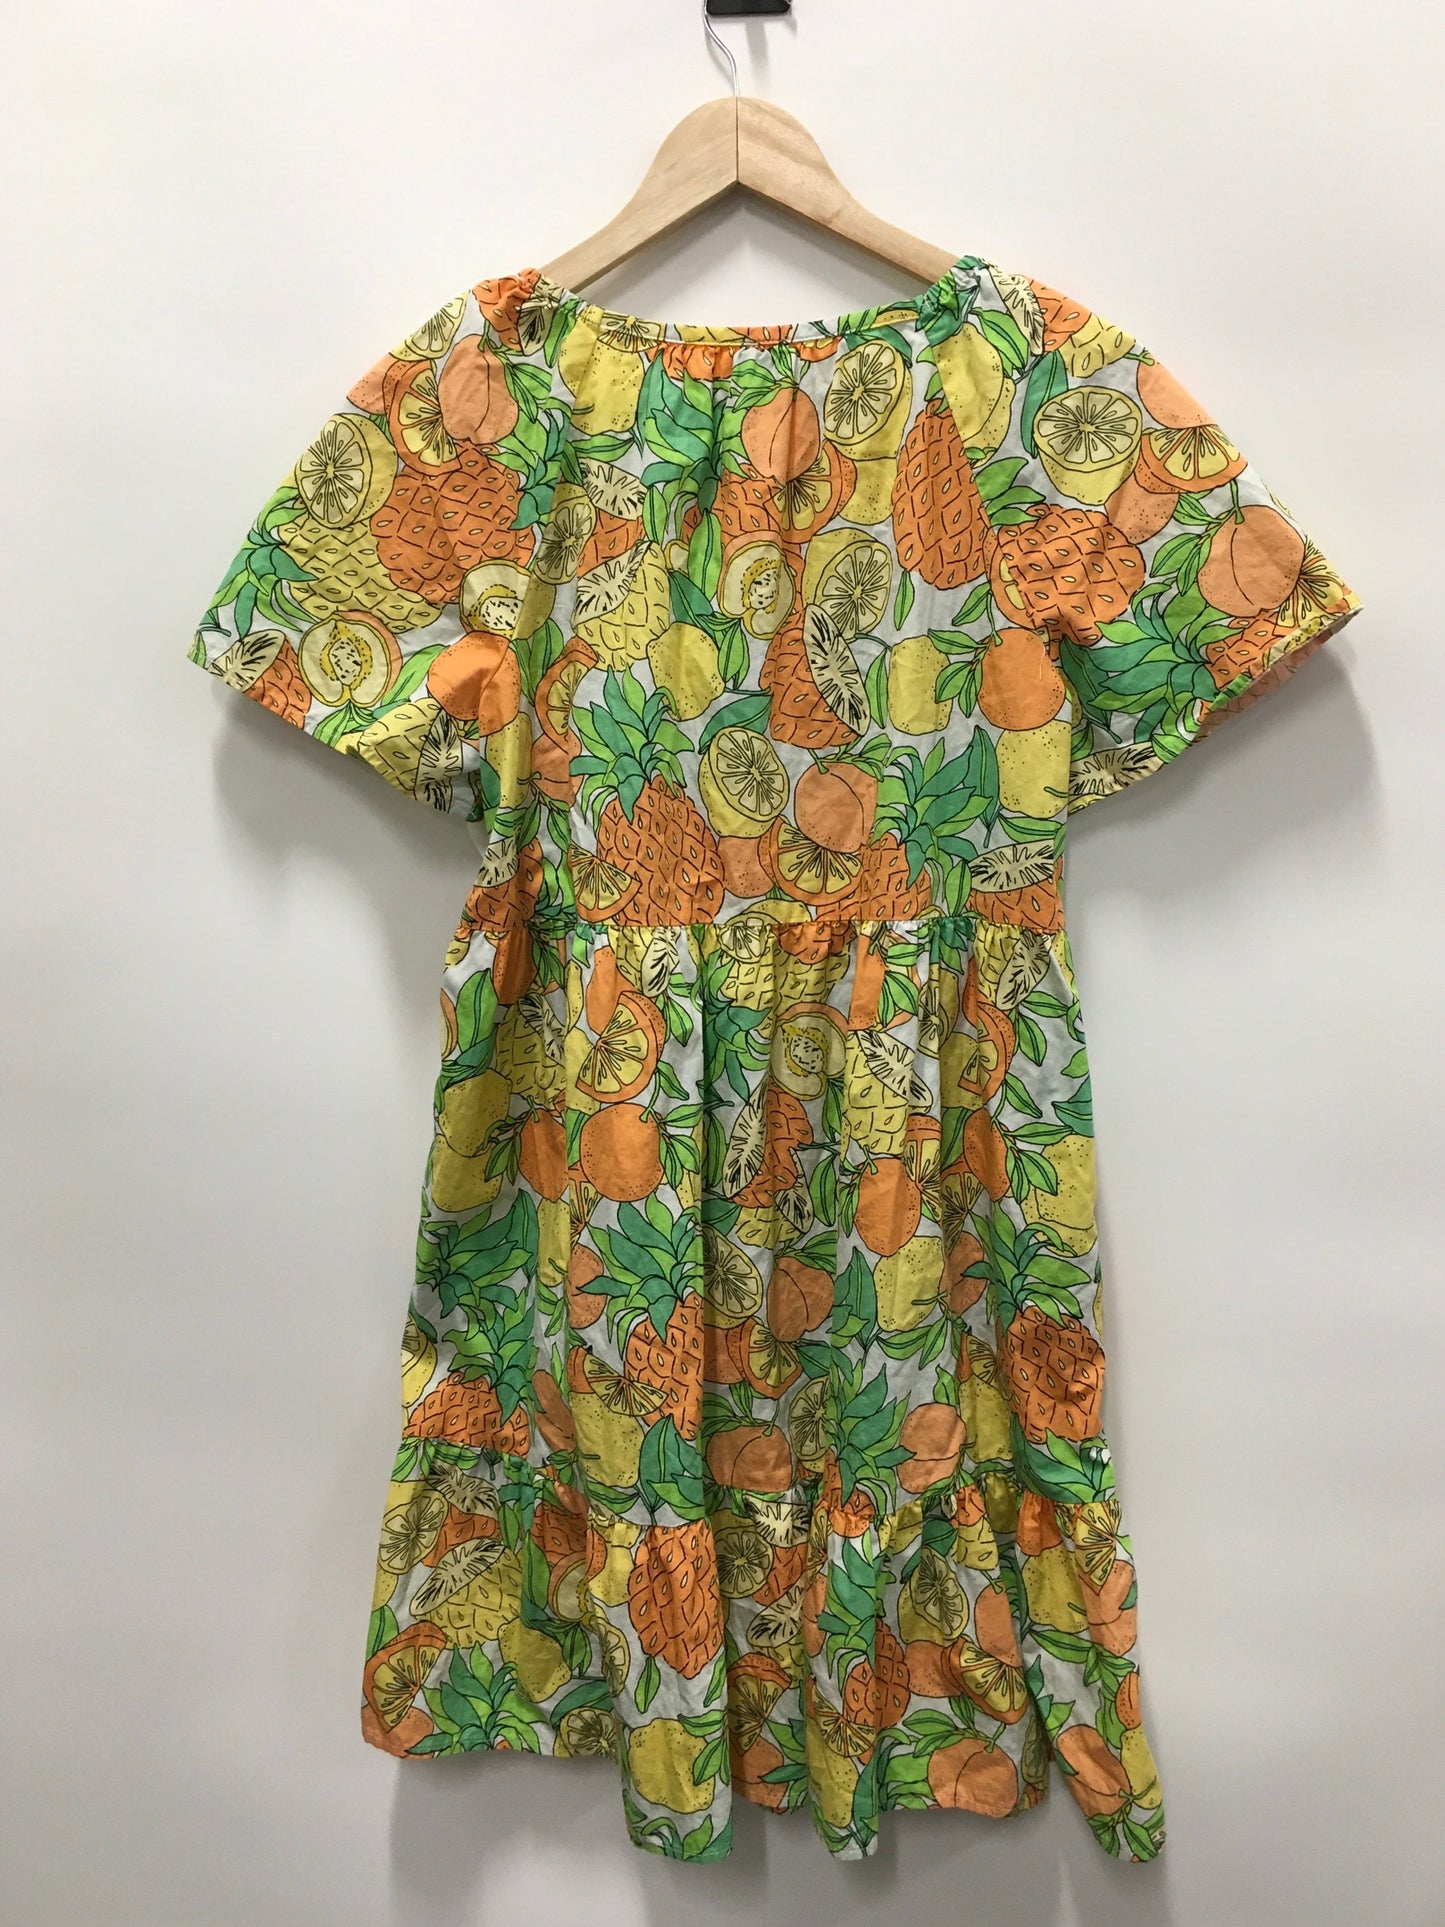 Orange & Yellow Dress Casual Short Peyton and Parker, Size S